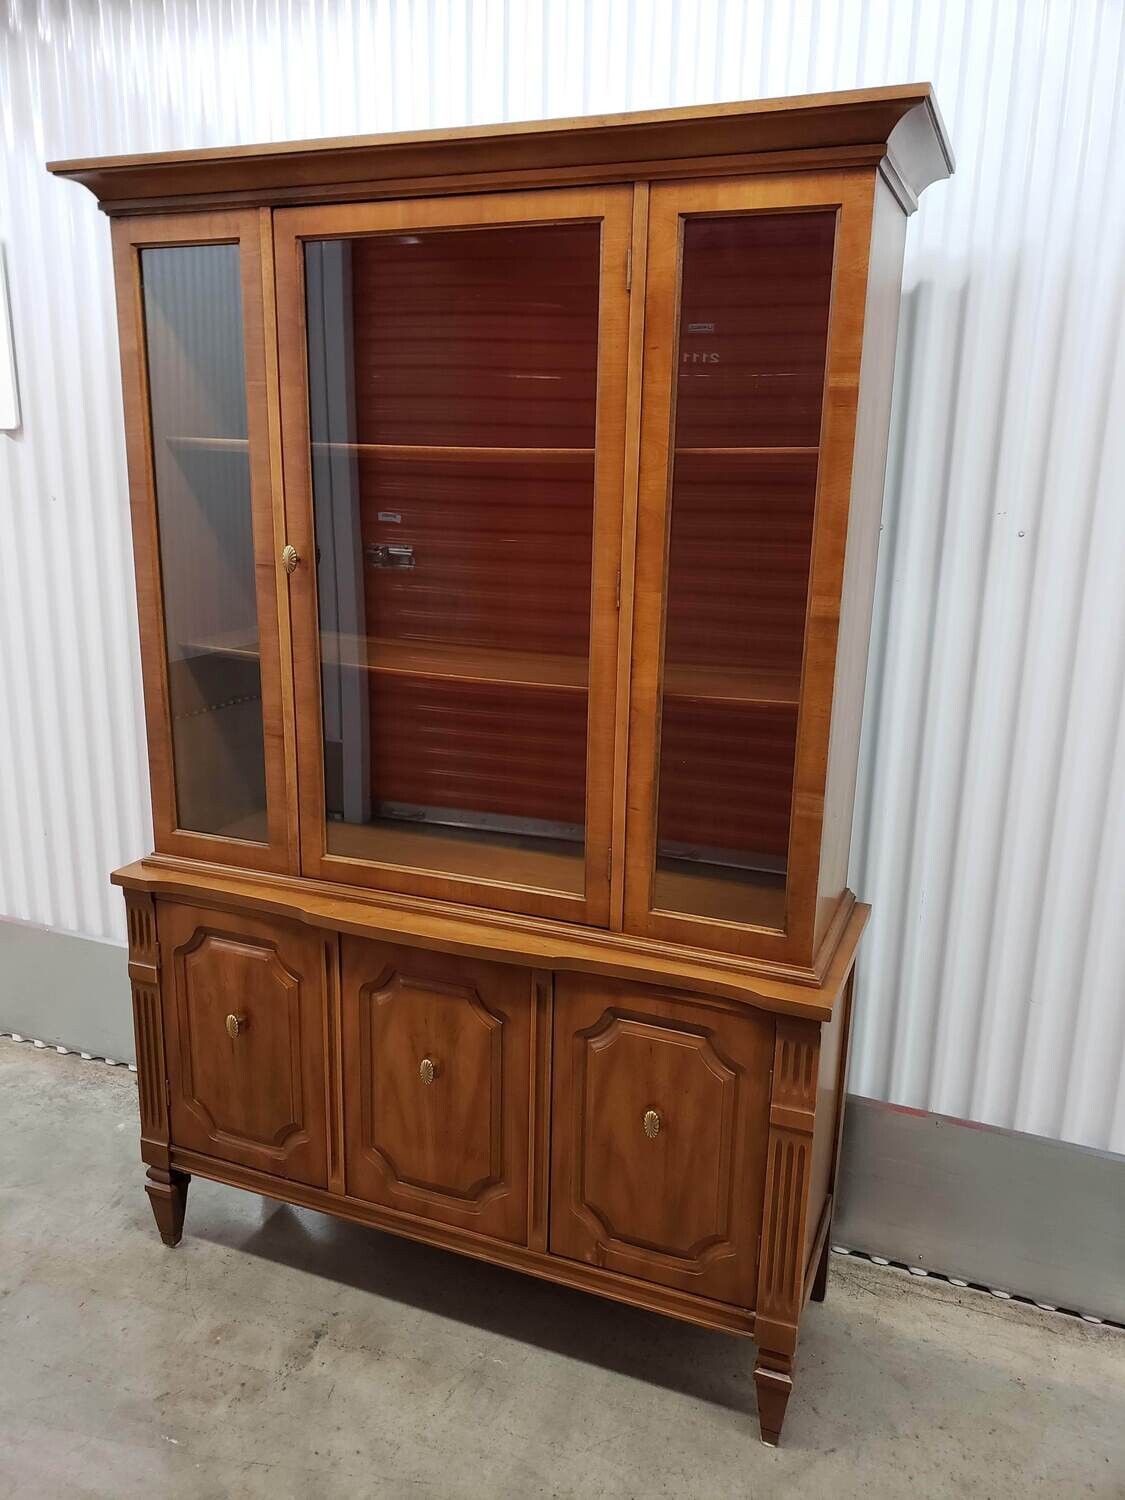 Vintage China Hutch with lots of storage! #2322 ** 8 mos. to sell, clearance